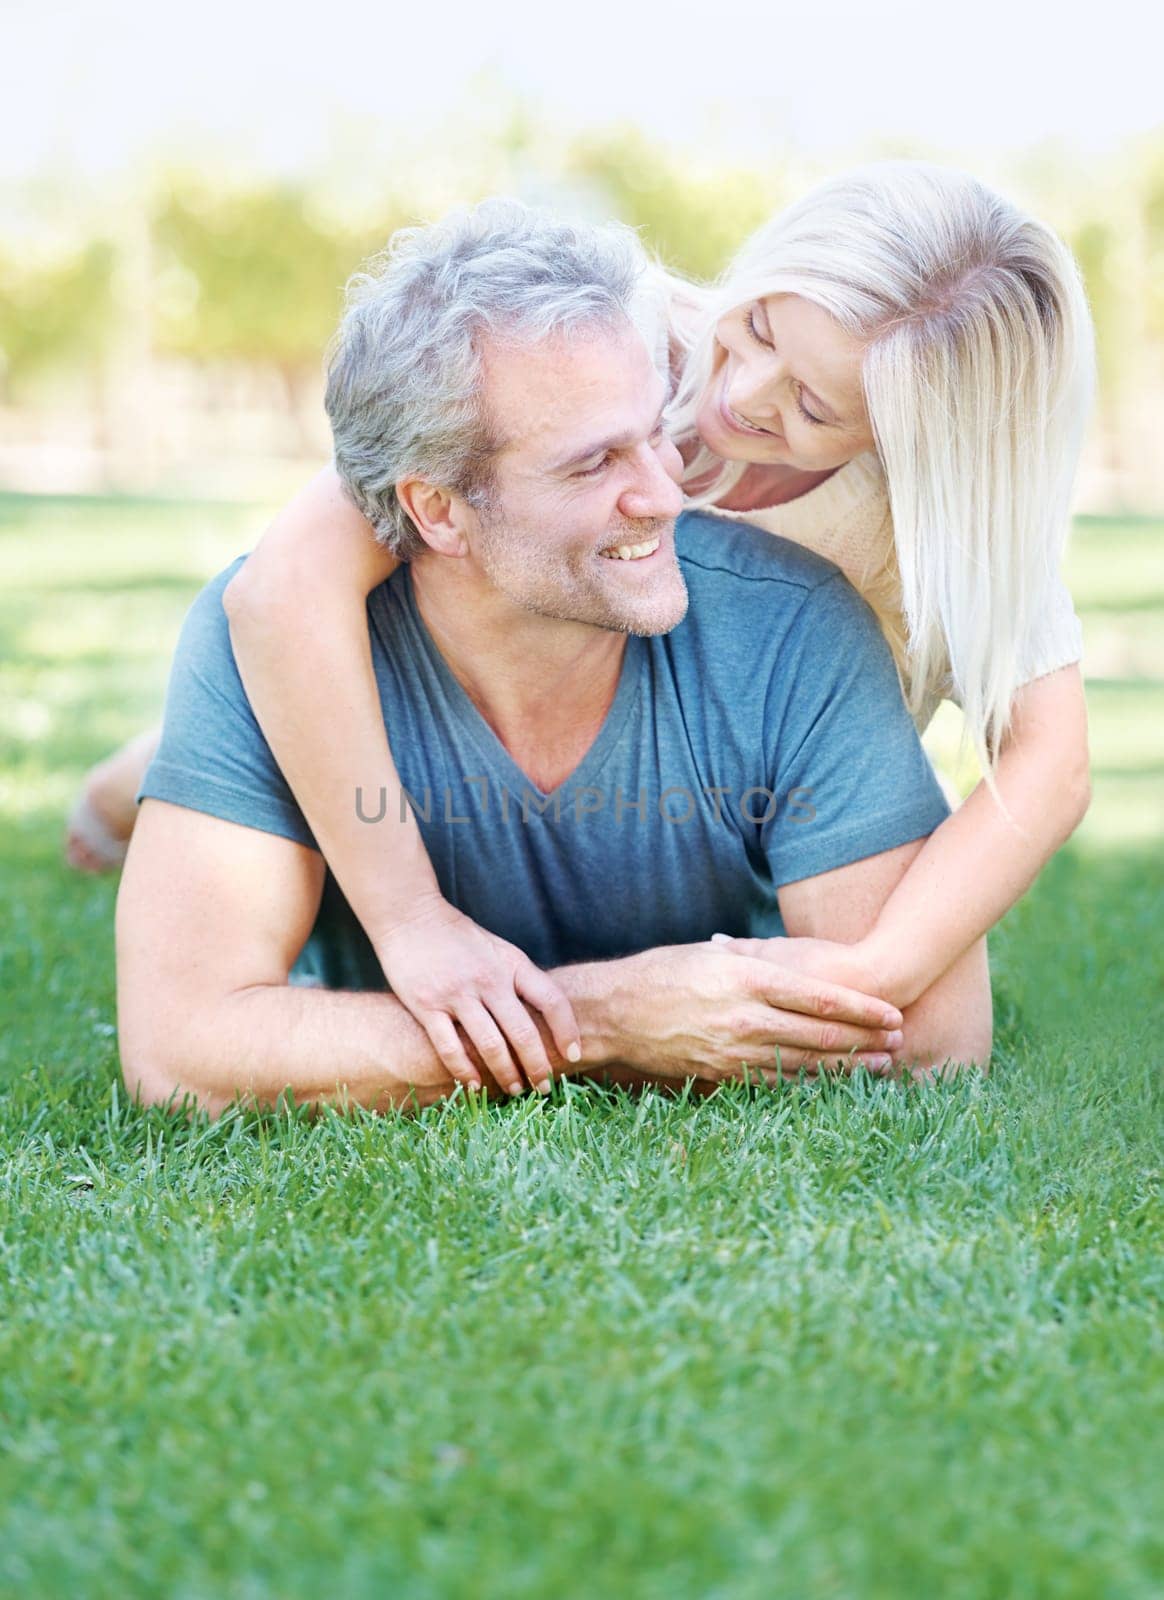 Happy, grass and senior couple in park for bonding, relationship and commitment outdoors on weekend. Love, retirement and mature man and woman embrace for romance, relaxing and marriage in nature by YuriArcurs